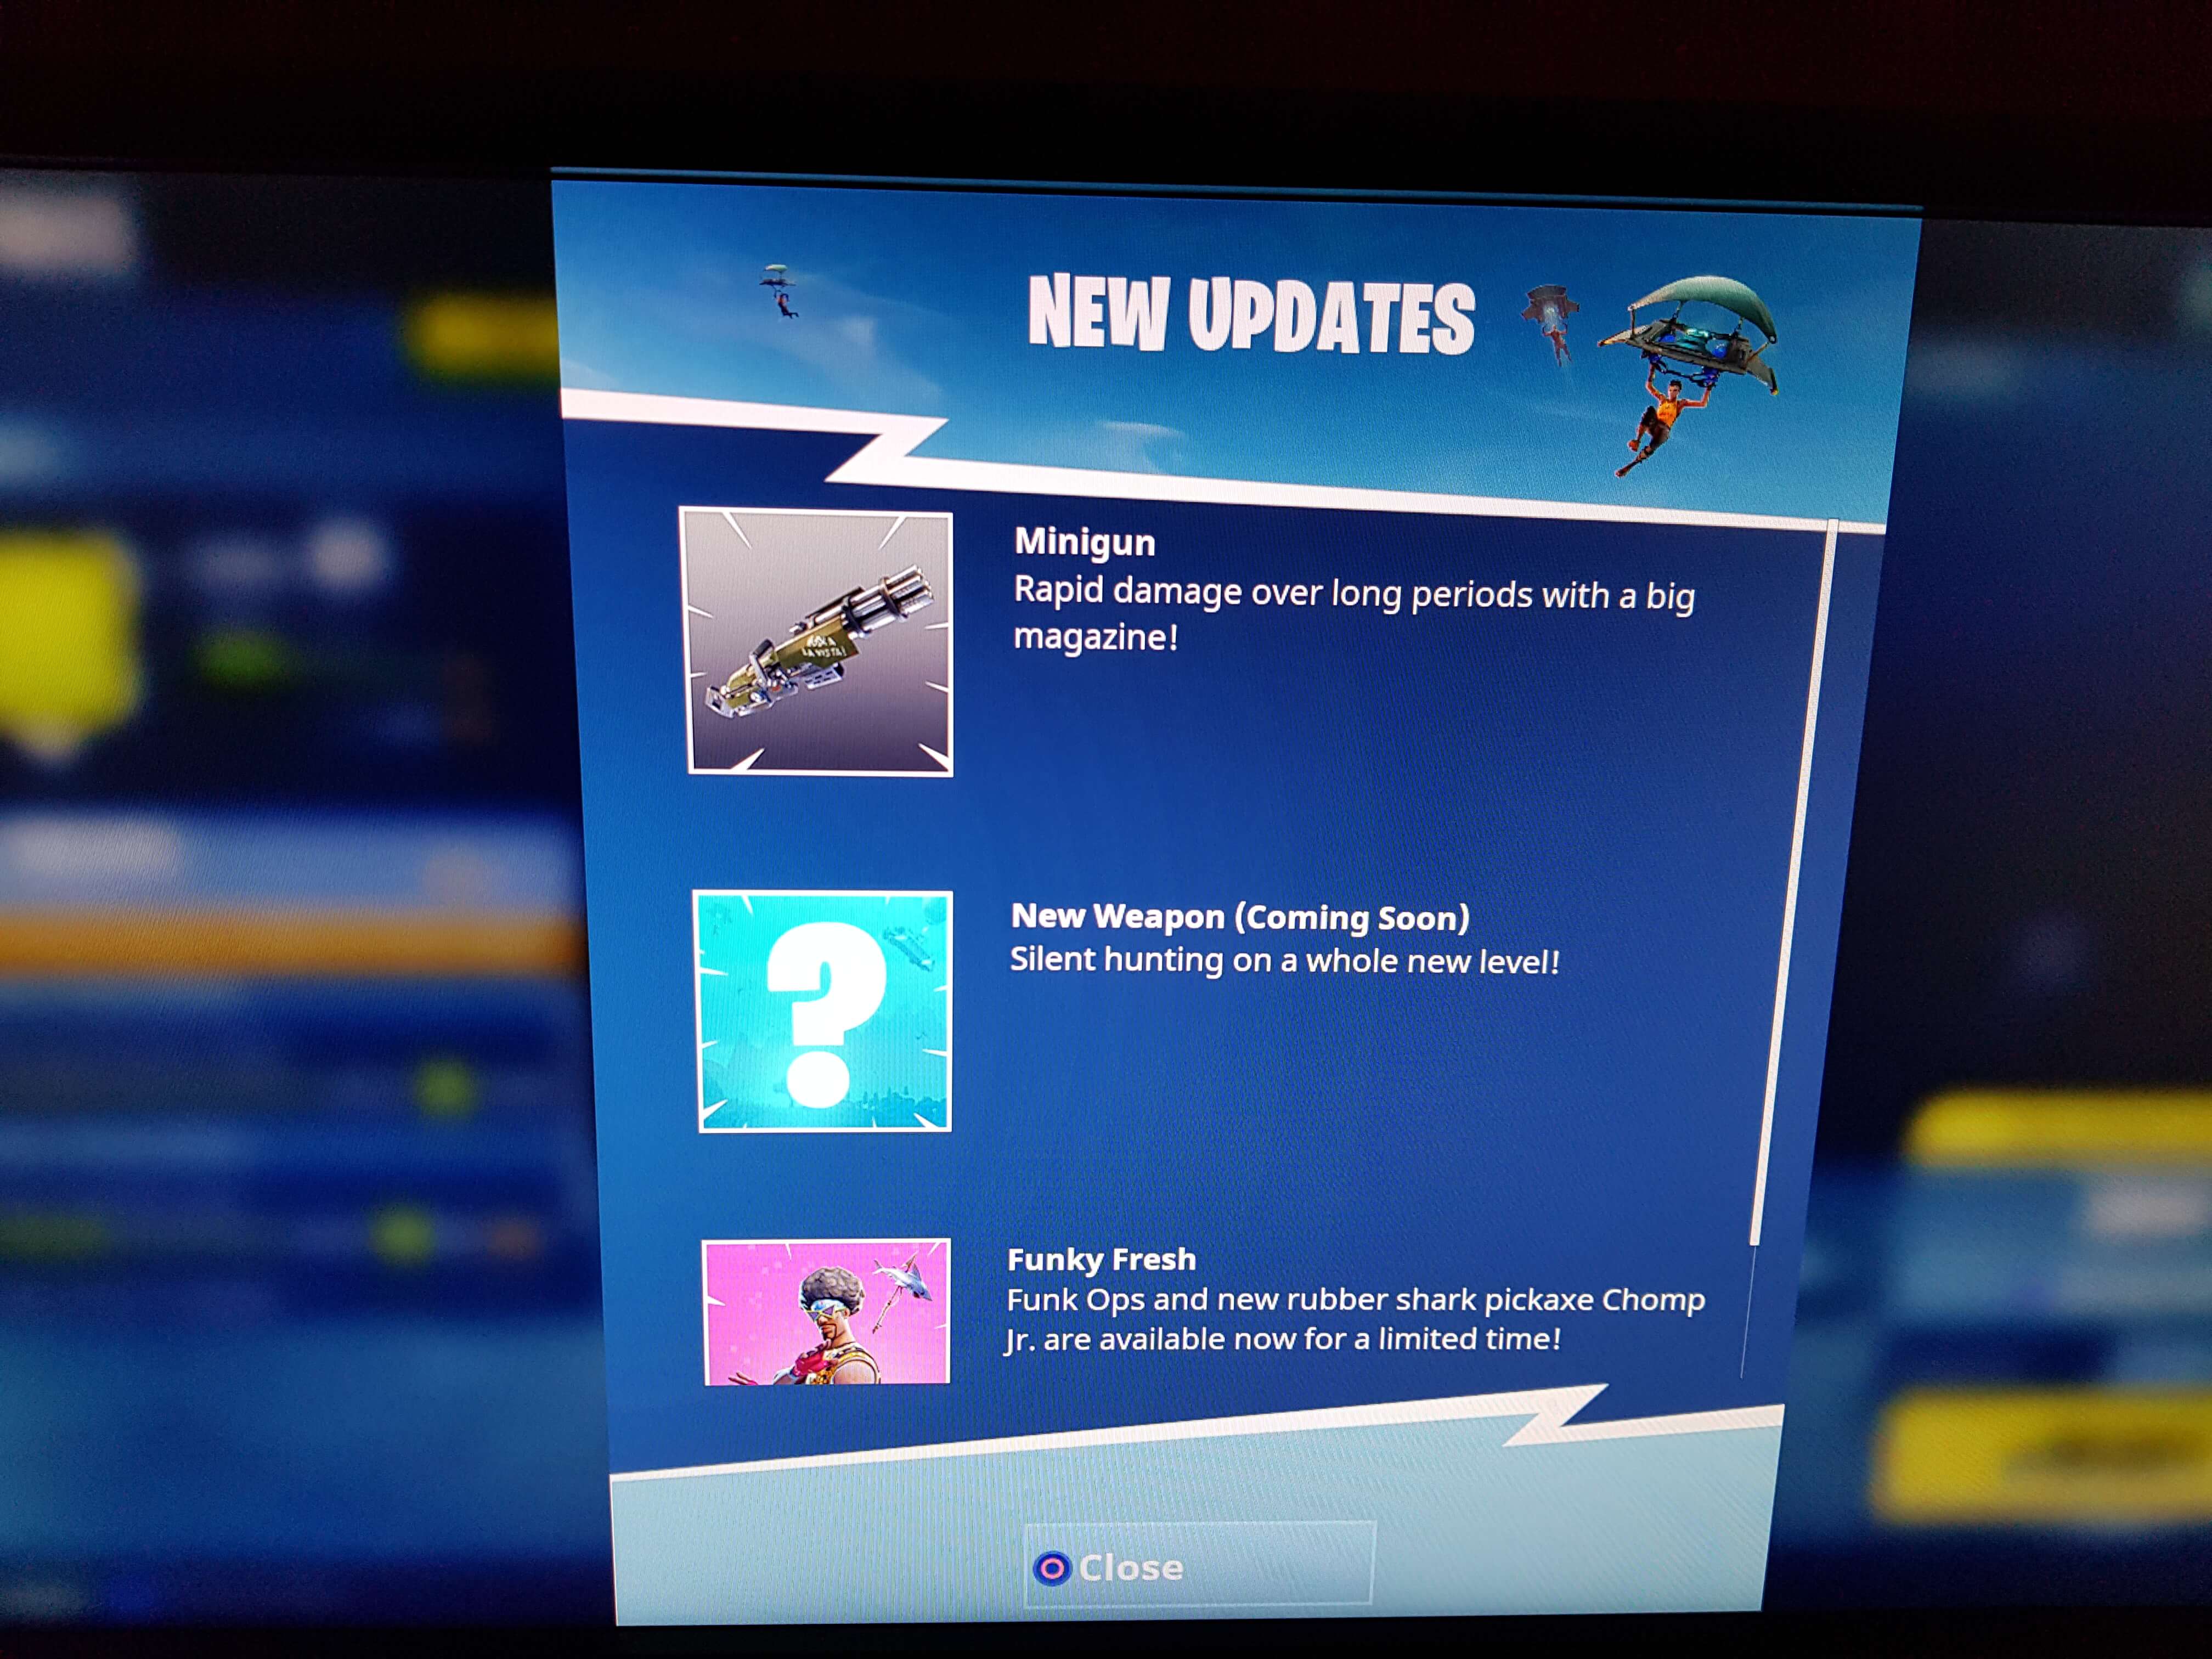 Silenced Sniper? Crossbow? Throwing knives? A New Fortnite ... - 4032 x 3024 jpeg 4869kB